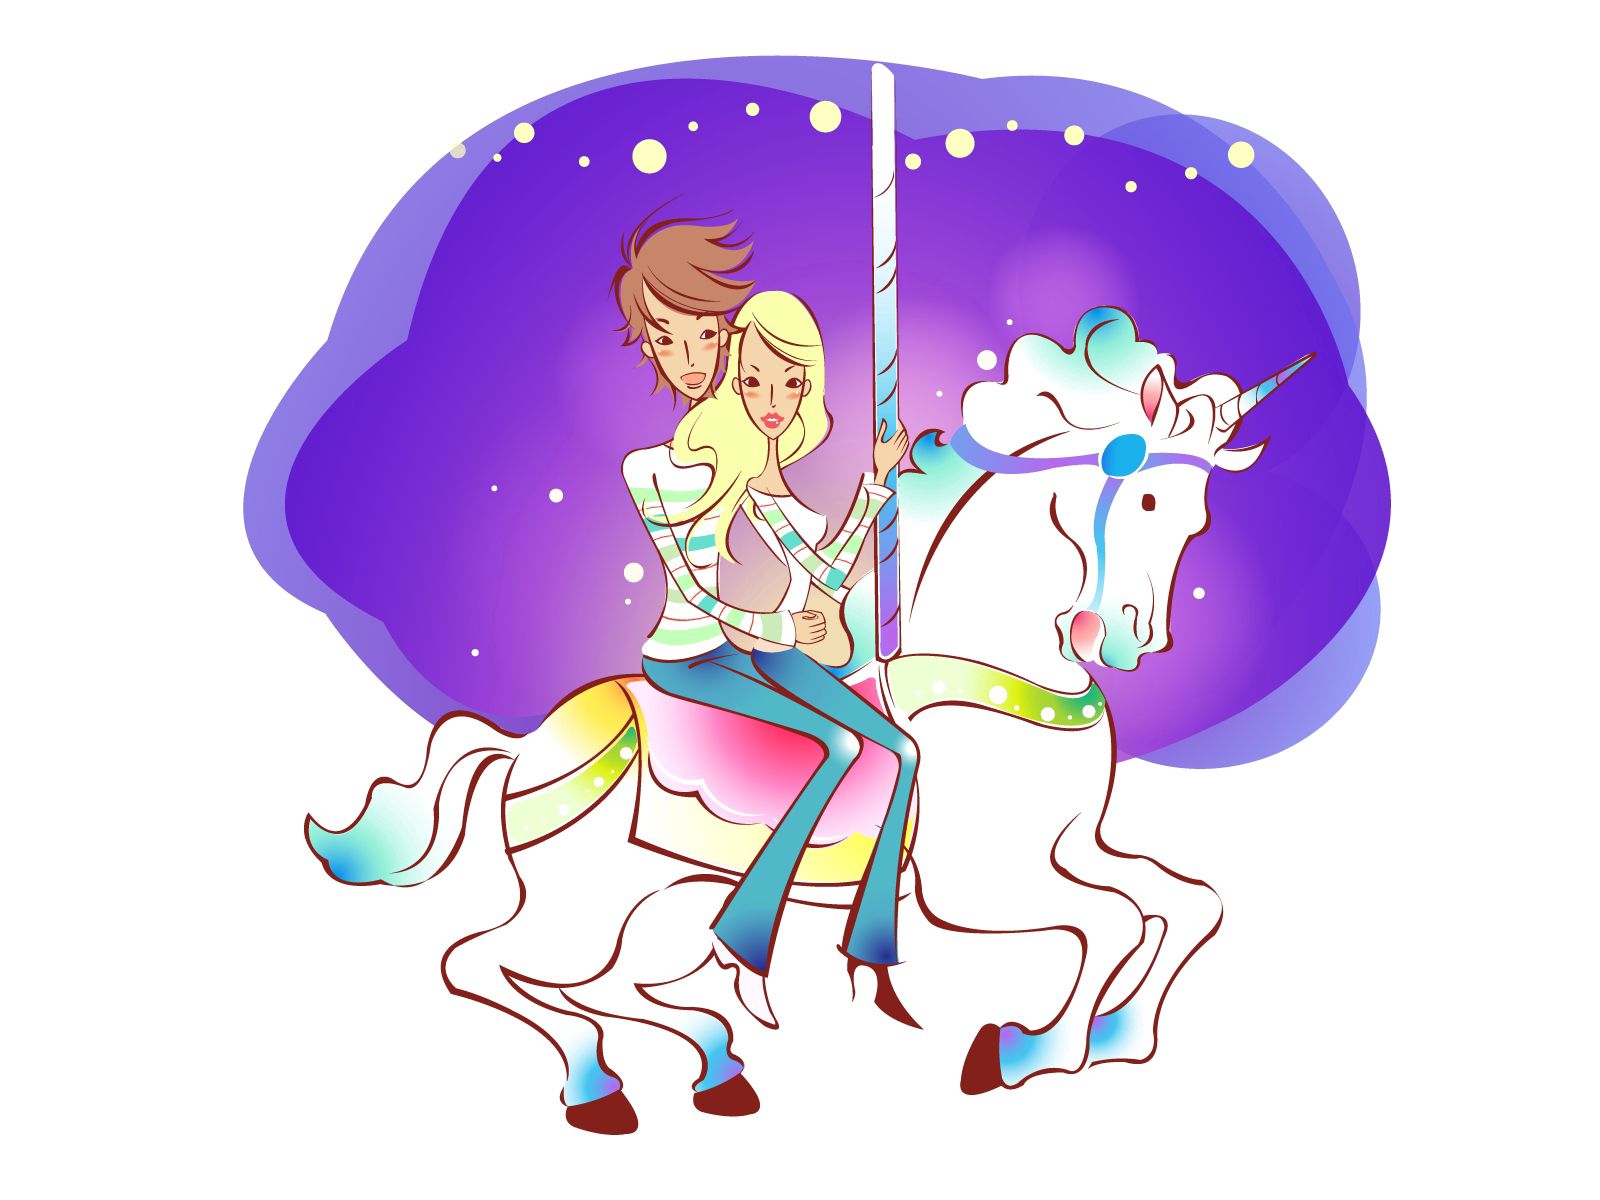 art, love, couple, pair, picture, drawing, entertainment, carousel, merry go round